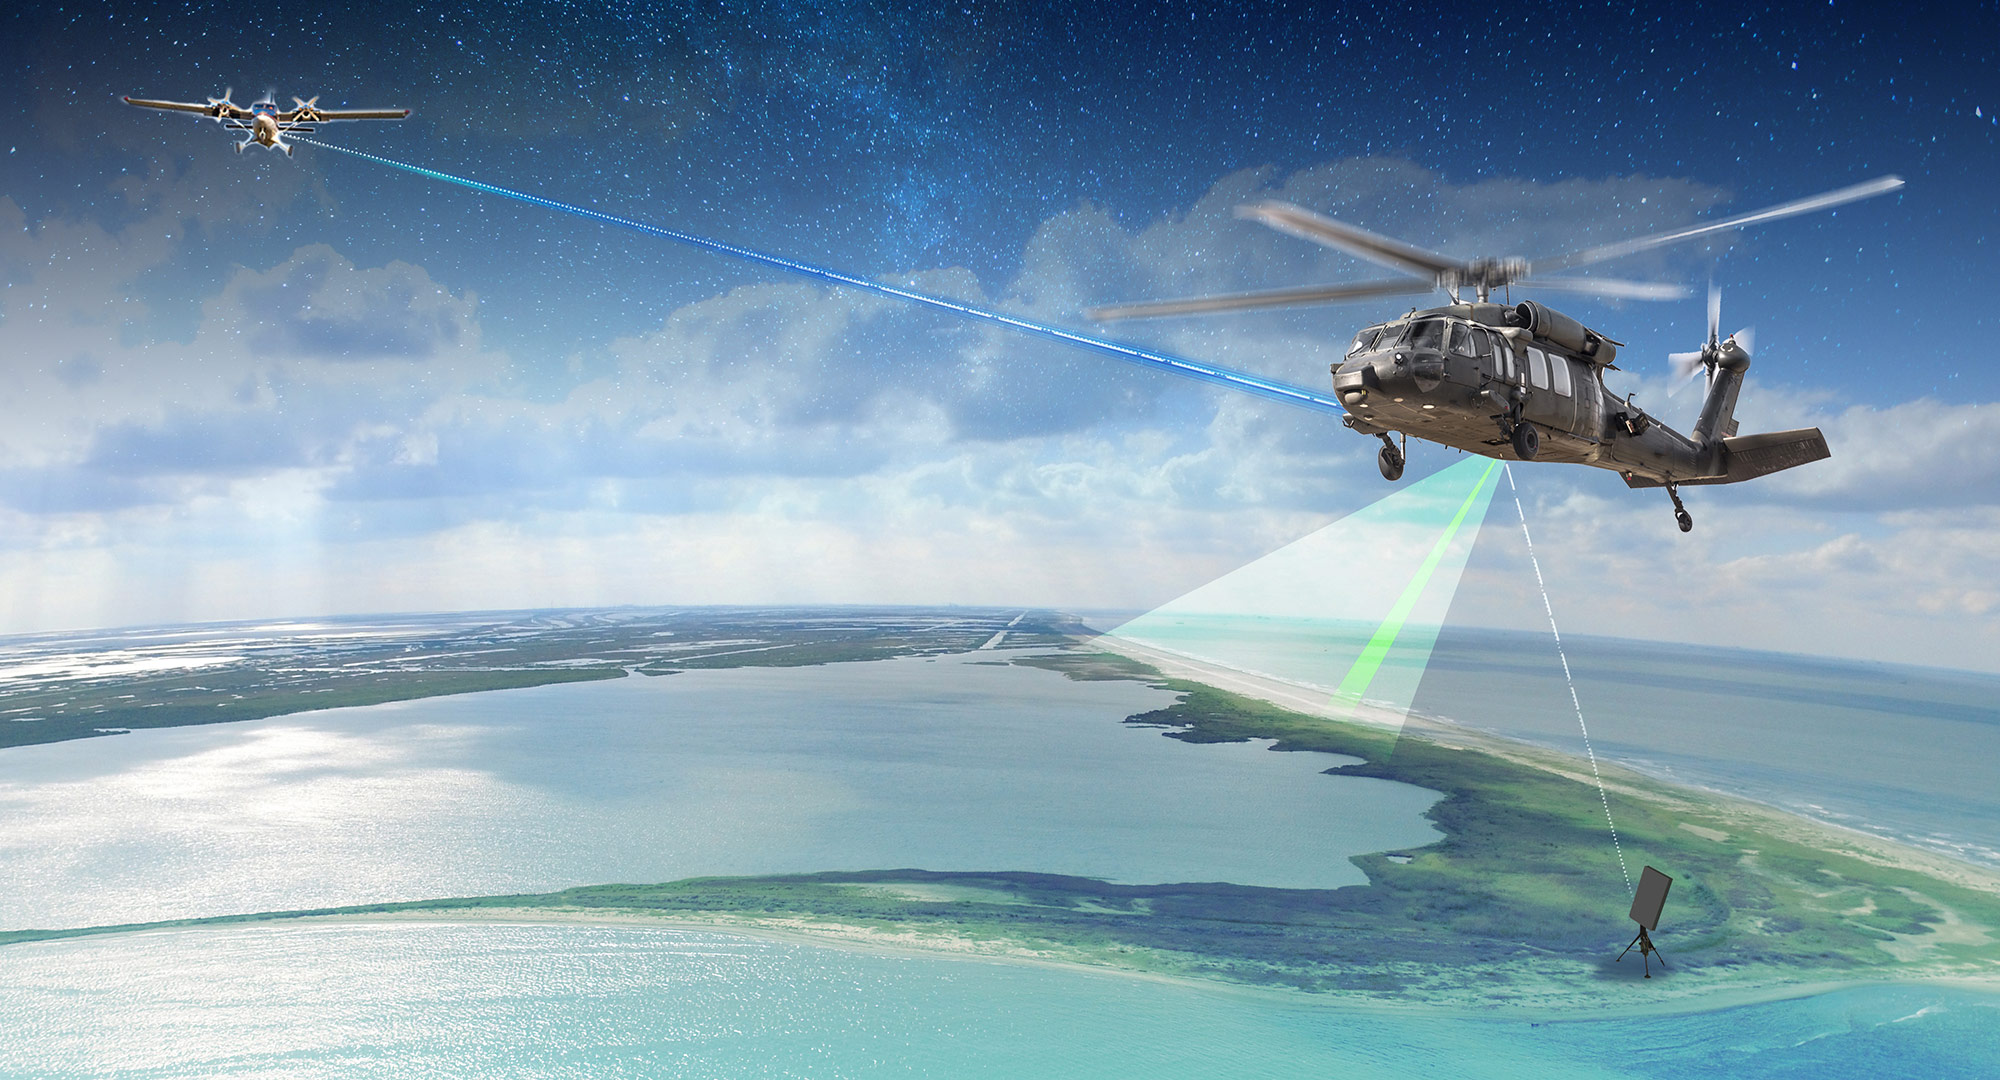 illustration of military helicopter and aircraft over water